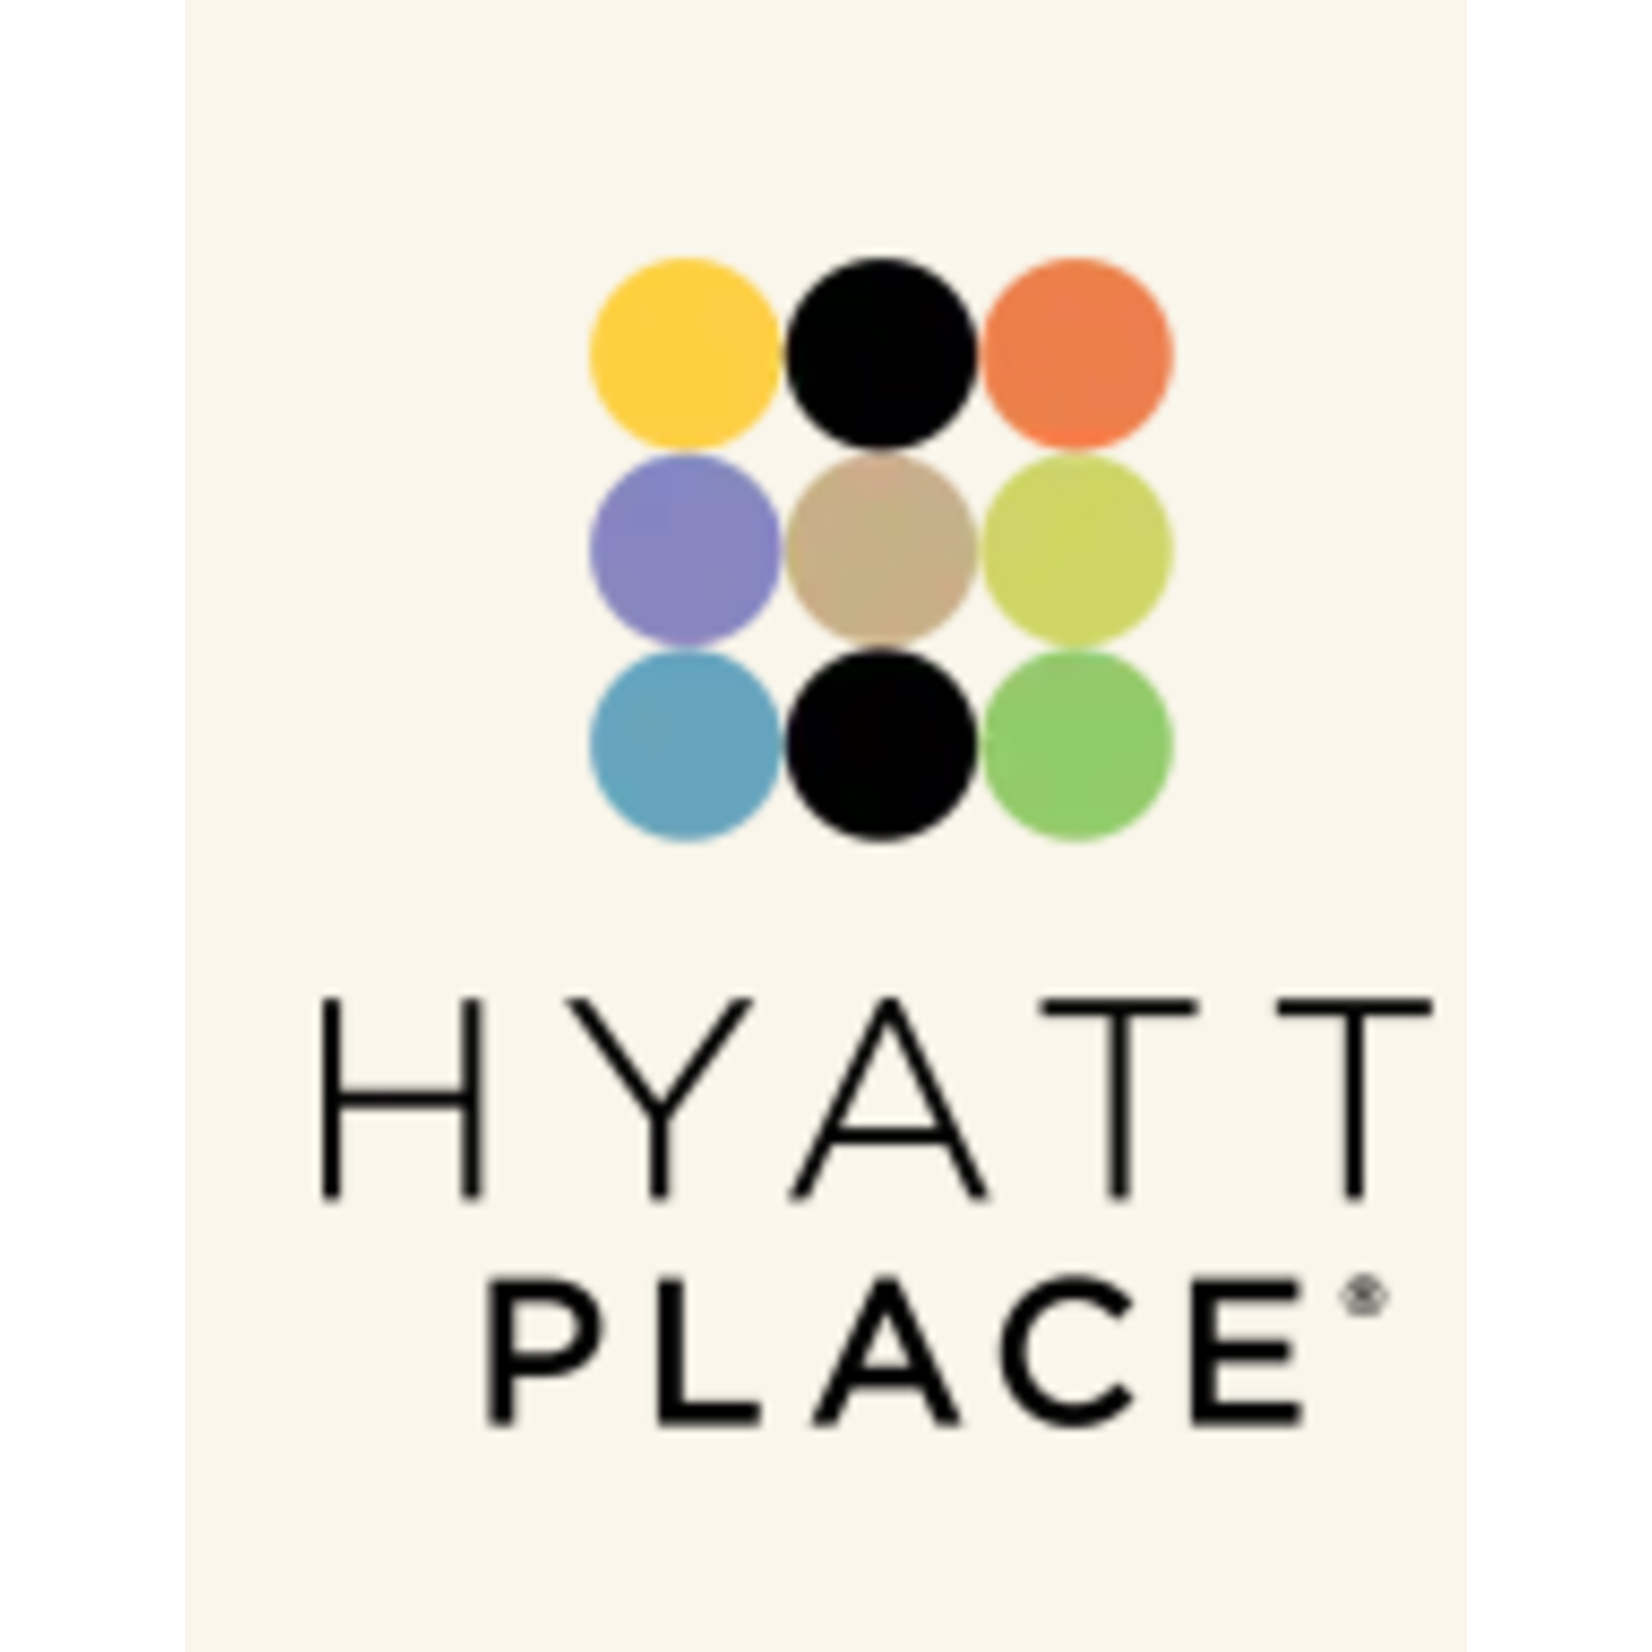 CO-Hyatt Place-Colorado Springs/Garden of the Gods CO-Hyatt Place-Colorado Springs/Garden of the Gods $449.00 (2) Night Stay w/pool, b-fast-Exp 12/31/23